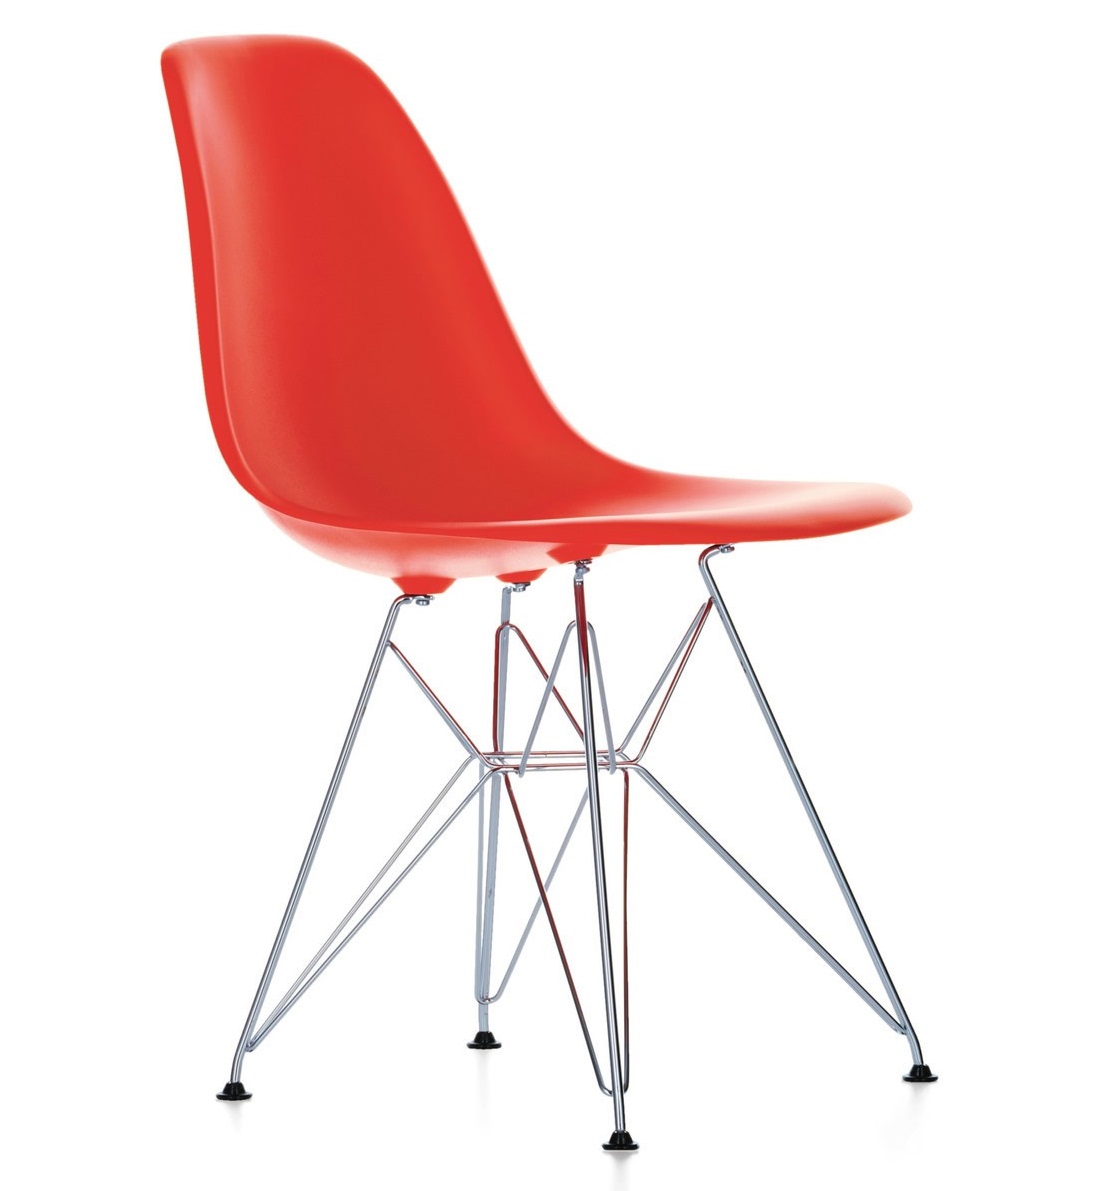 dsr chair eames red